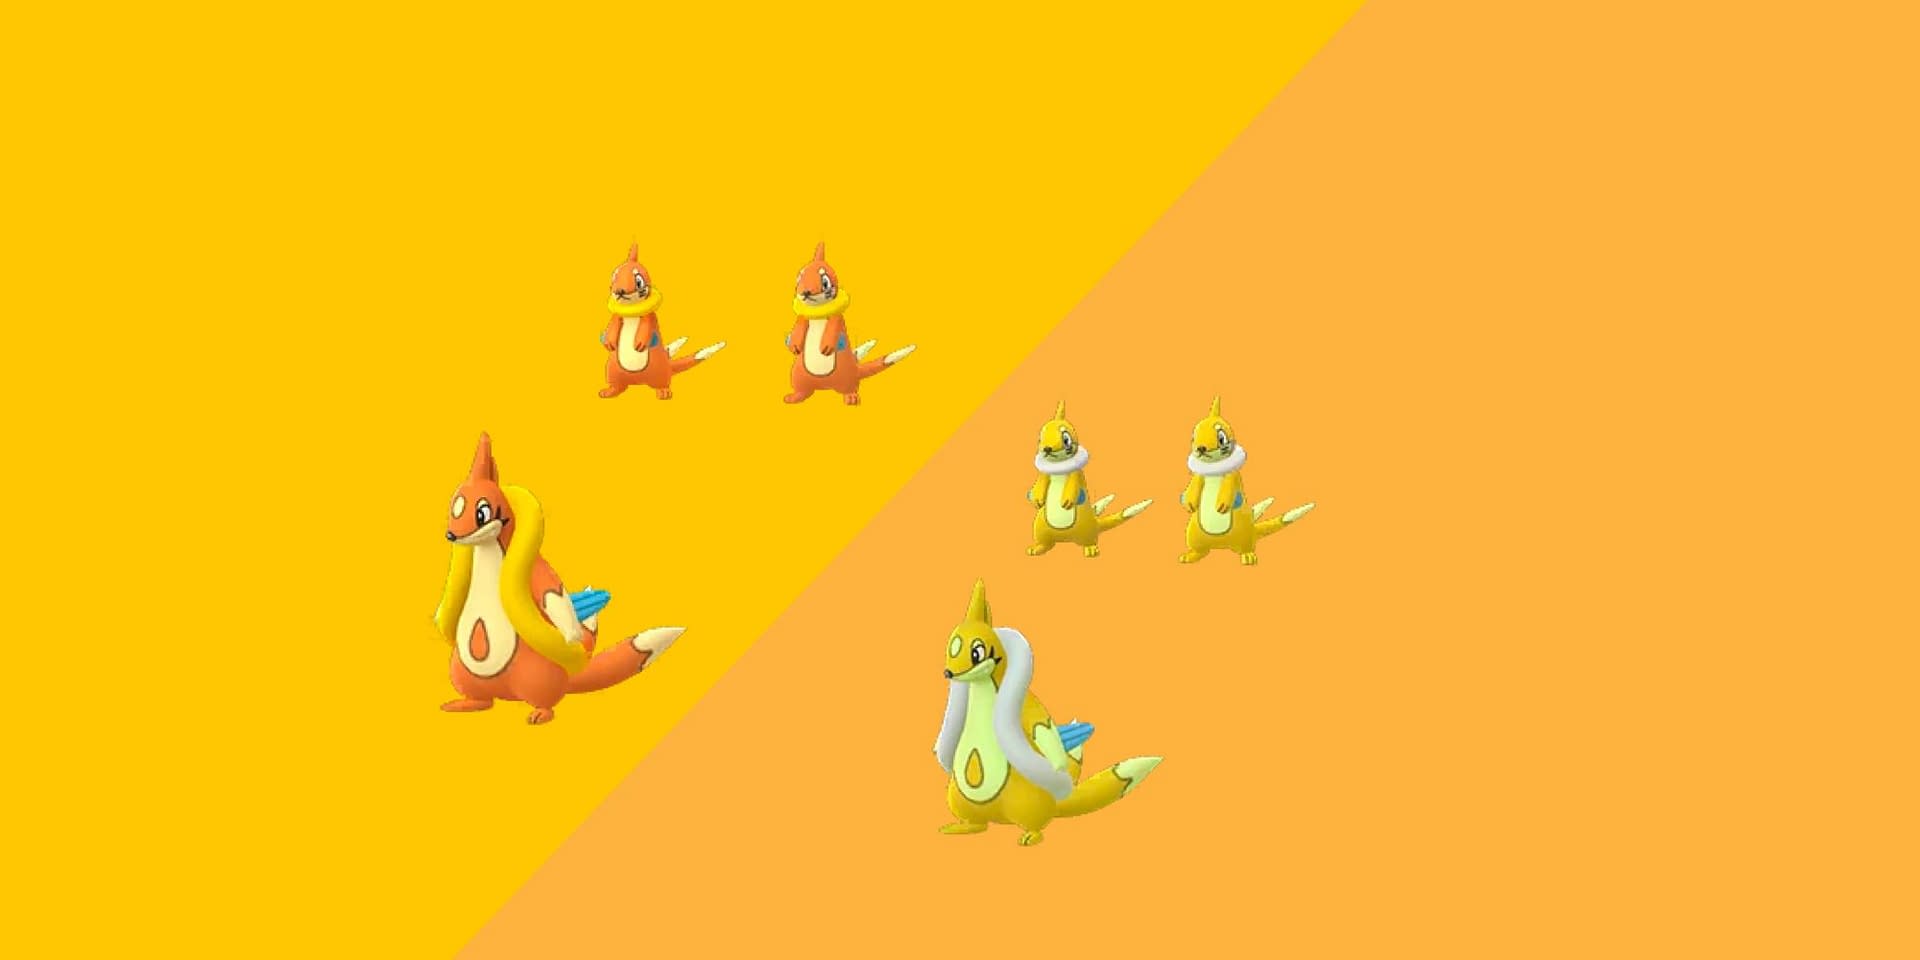 Shiny Buizel To Debut In New Pokémon GO Event Next Week